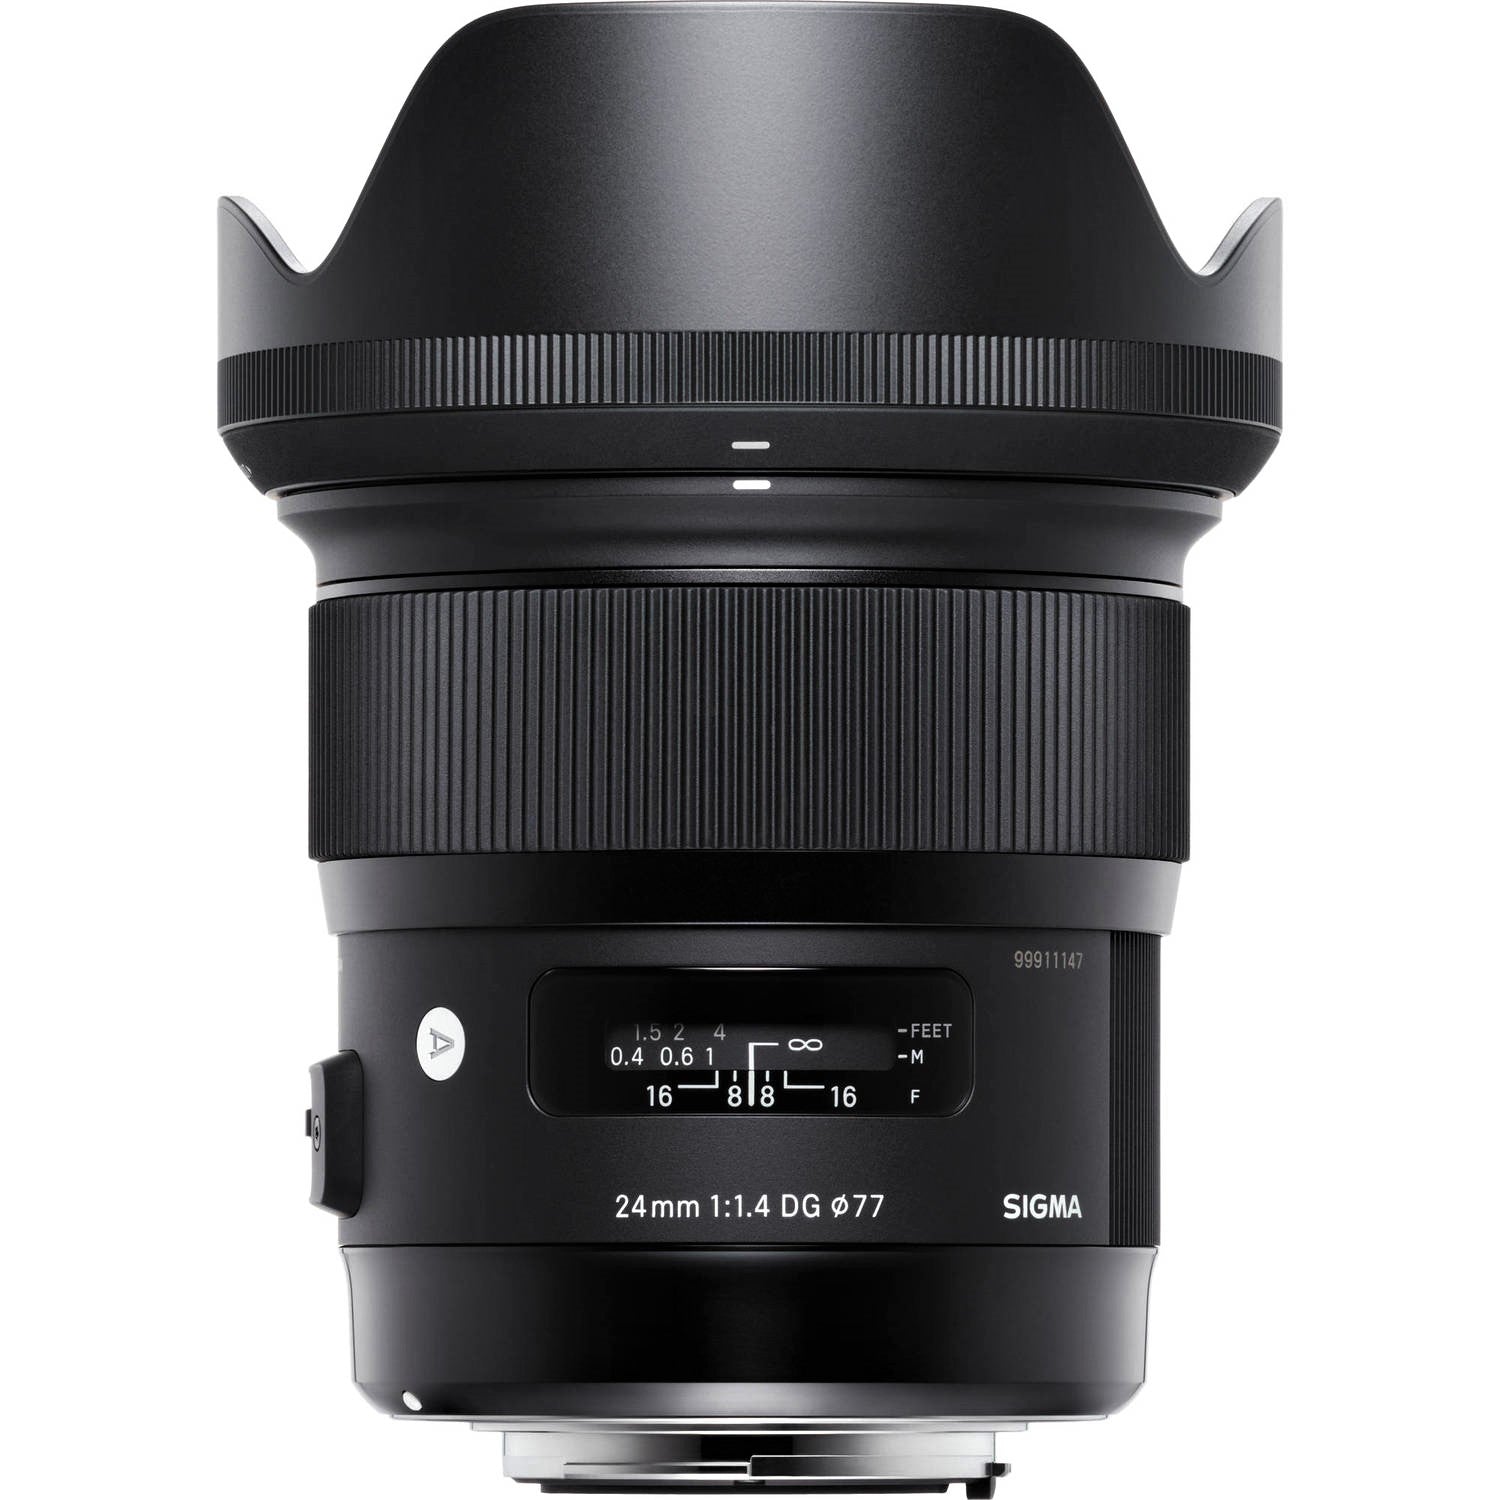 Sigma 24mm F1.4 DG HSM Art Lens for Sigma SA with Attached Lens Hood on the Top